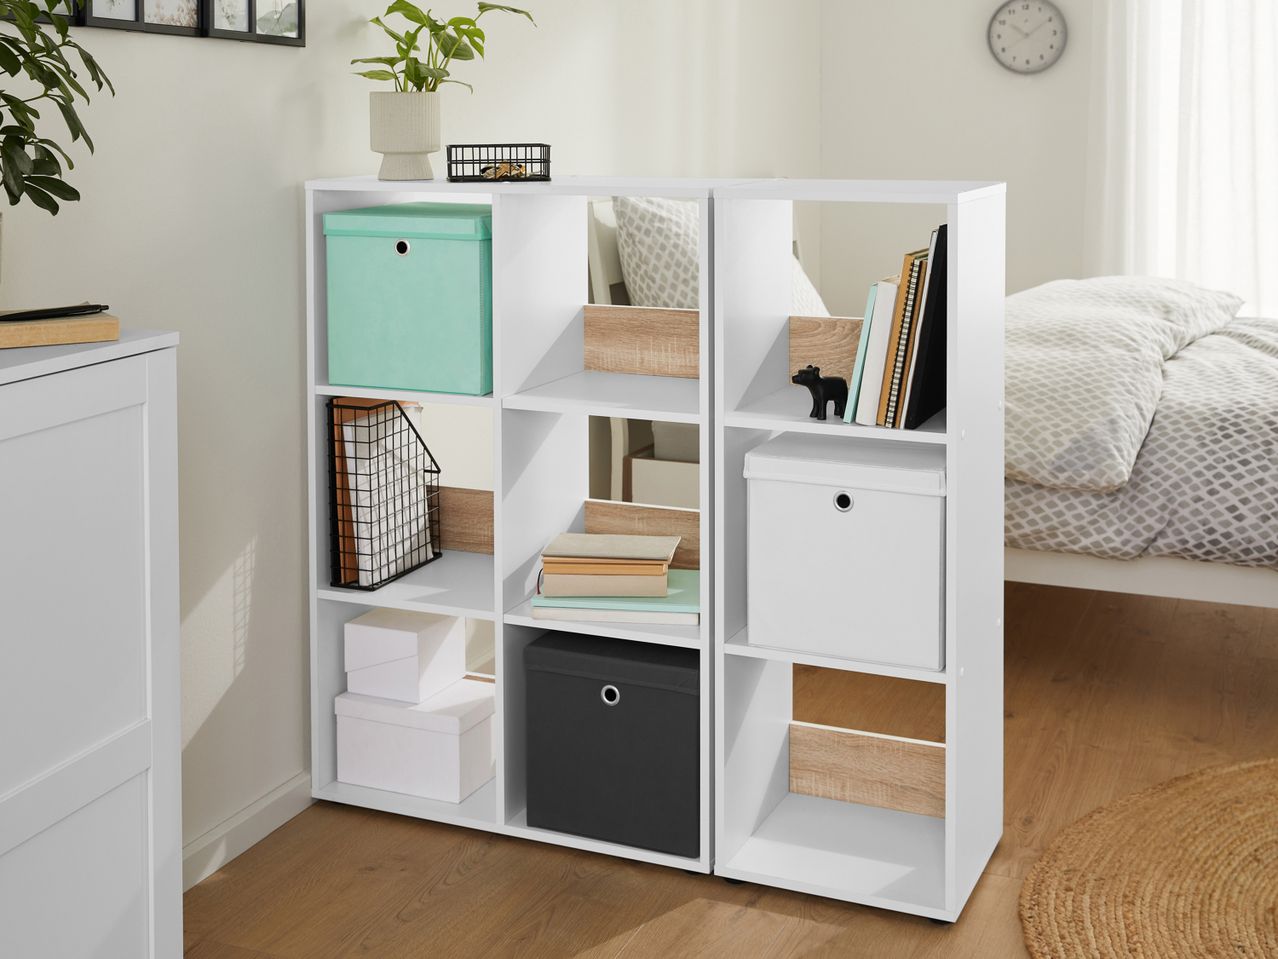 Go to full screen view: Shelving Unit with 6 compartments - Image 3